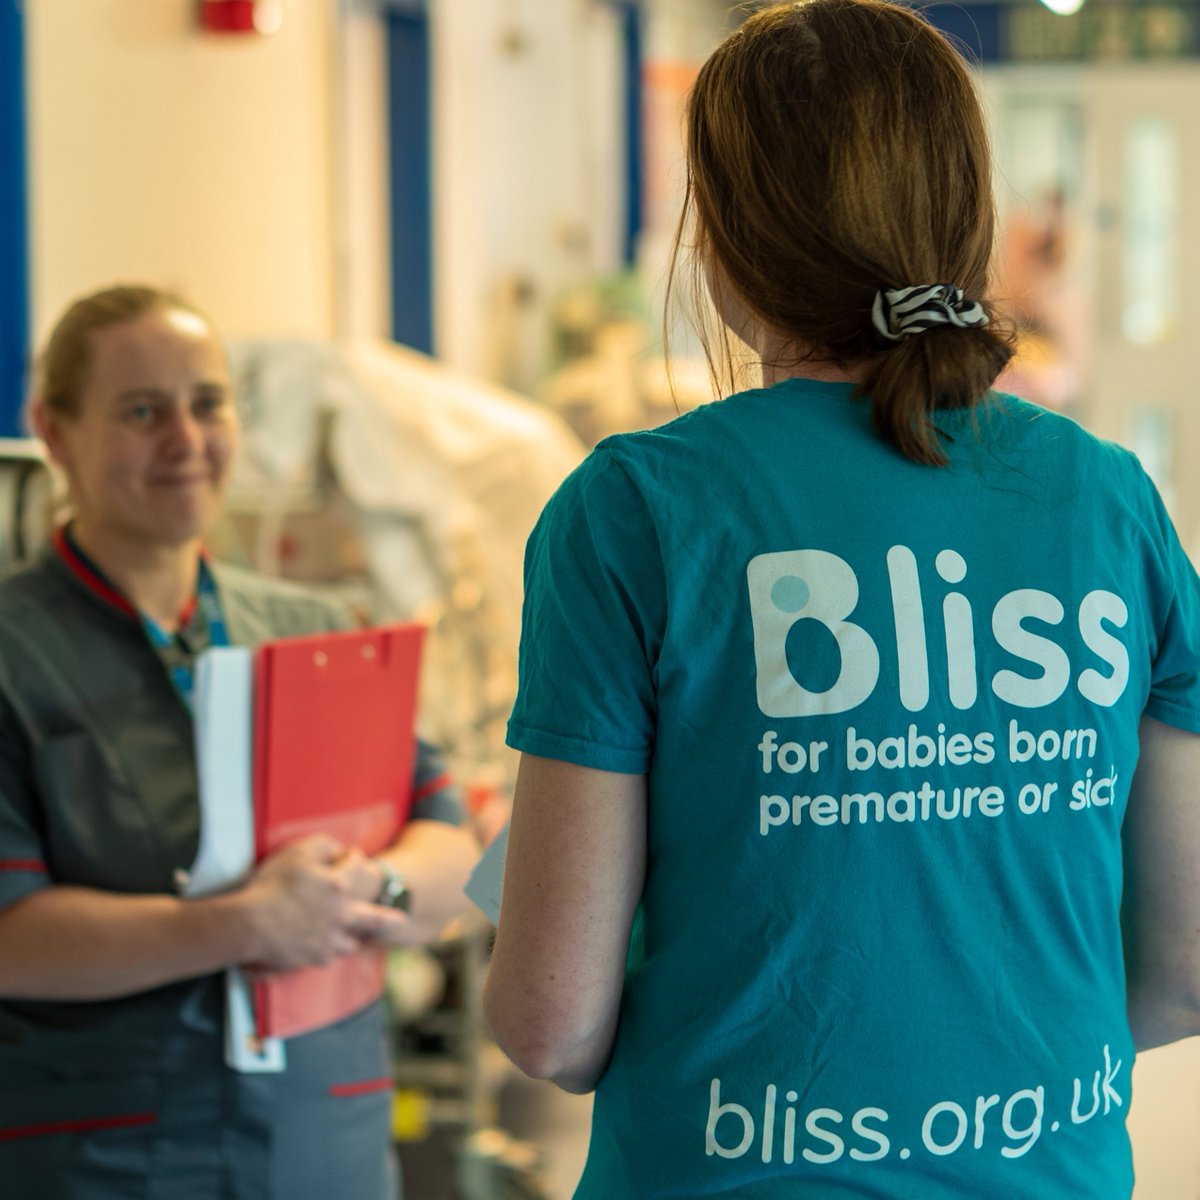 Have you had a baby born premature or sick, and have 5 minutes to share your thoughts about the Bliss website? We've made some changes and want to hear your feedback. Complete our survey on your mobile: maze.pulse.ly/qctxvzi5tg or laptop/desktop: maze.pulse.ly/cc8us2zcd4